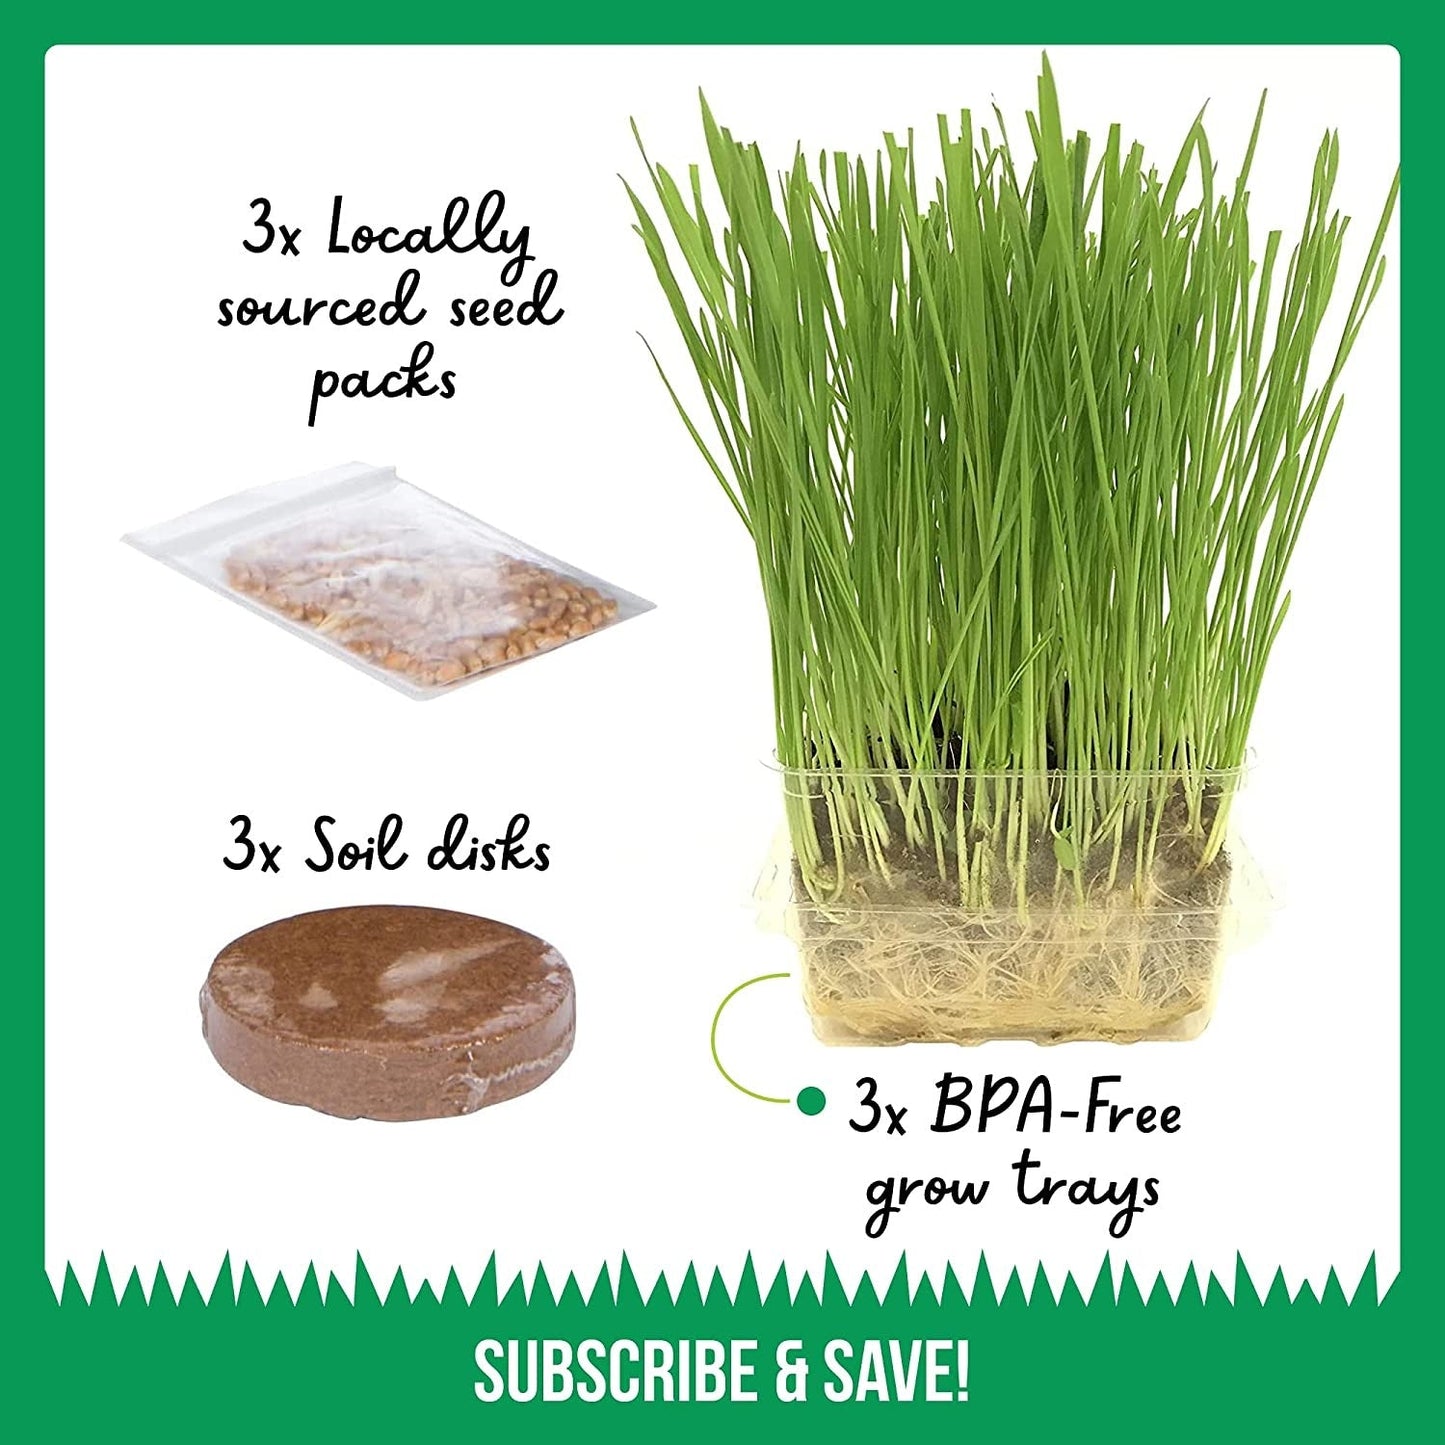 Cat Grass Growing Kit - (3 Pack) Organic Cat Grass Seed and Soil